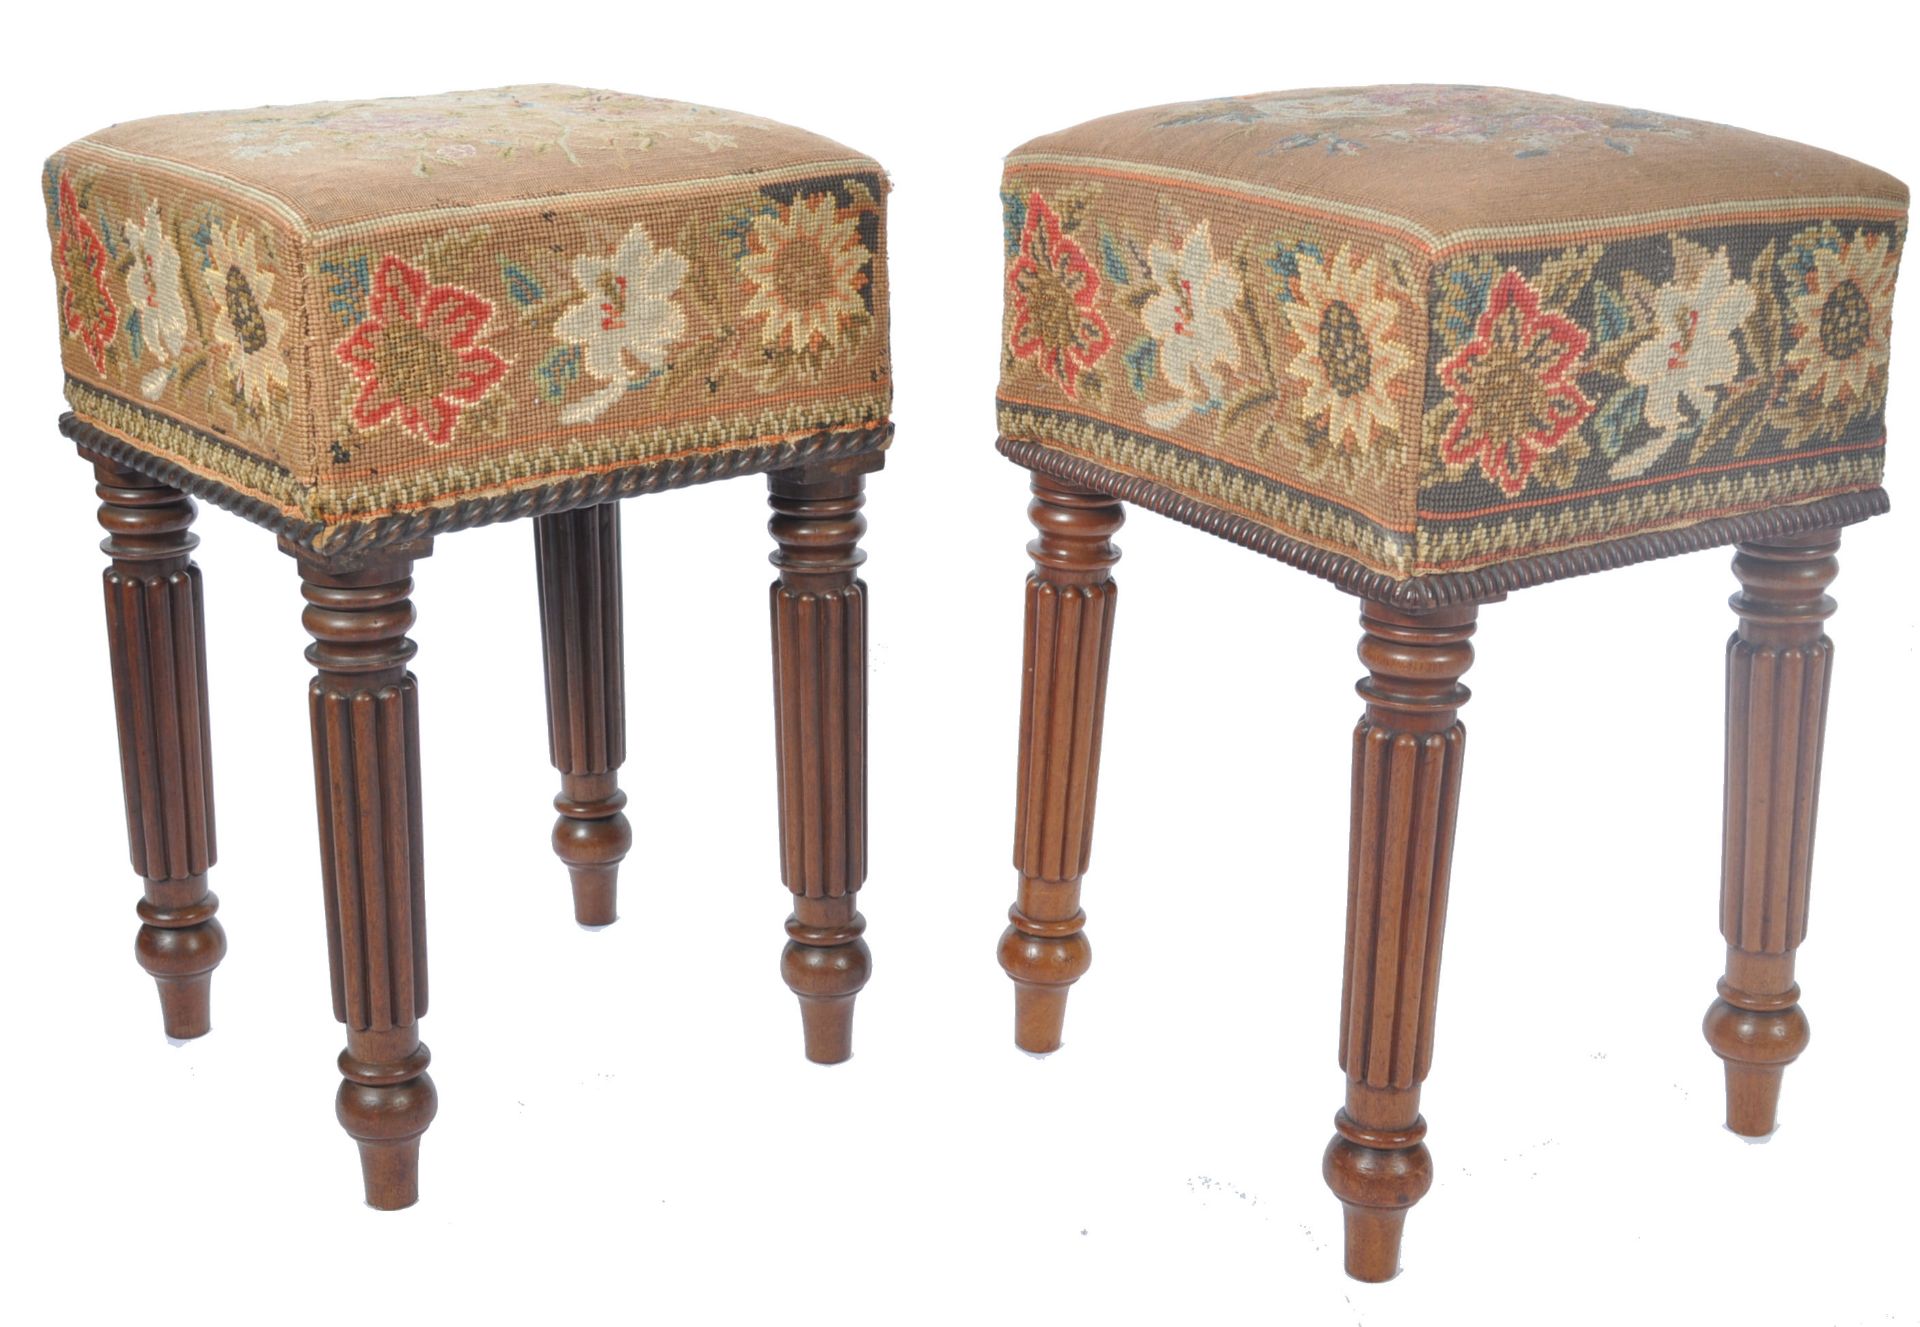 PAIR OF BELIEVED GILLOWS MAHOGANY UPHOLSTERED FOOTSTOOLS